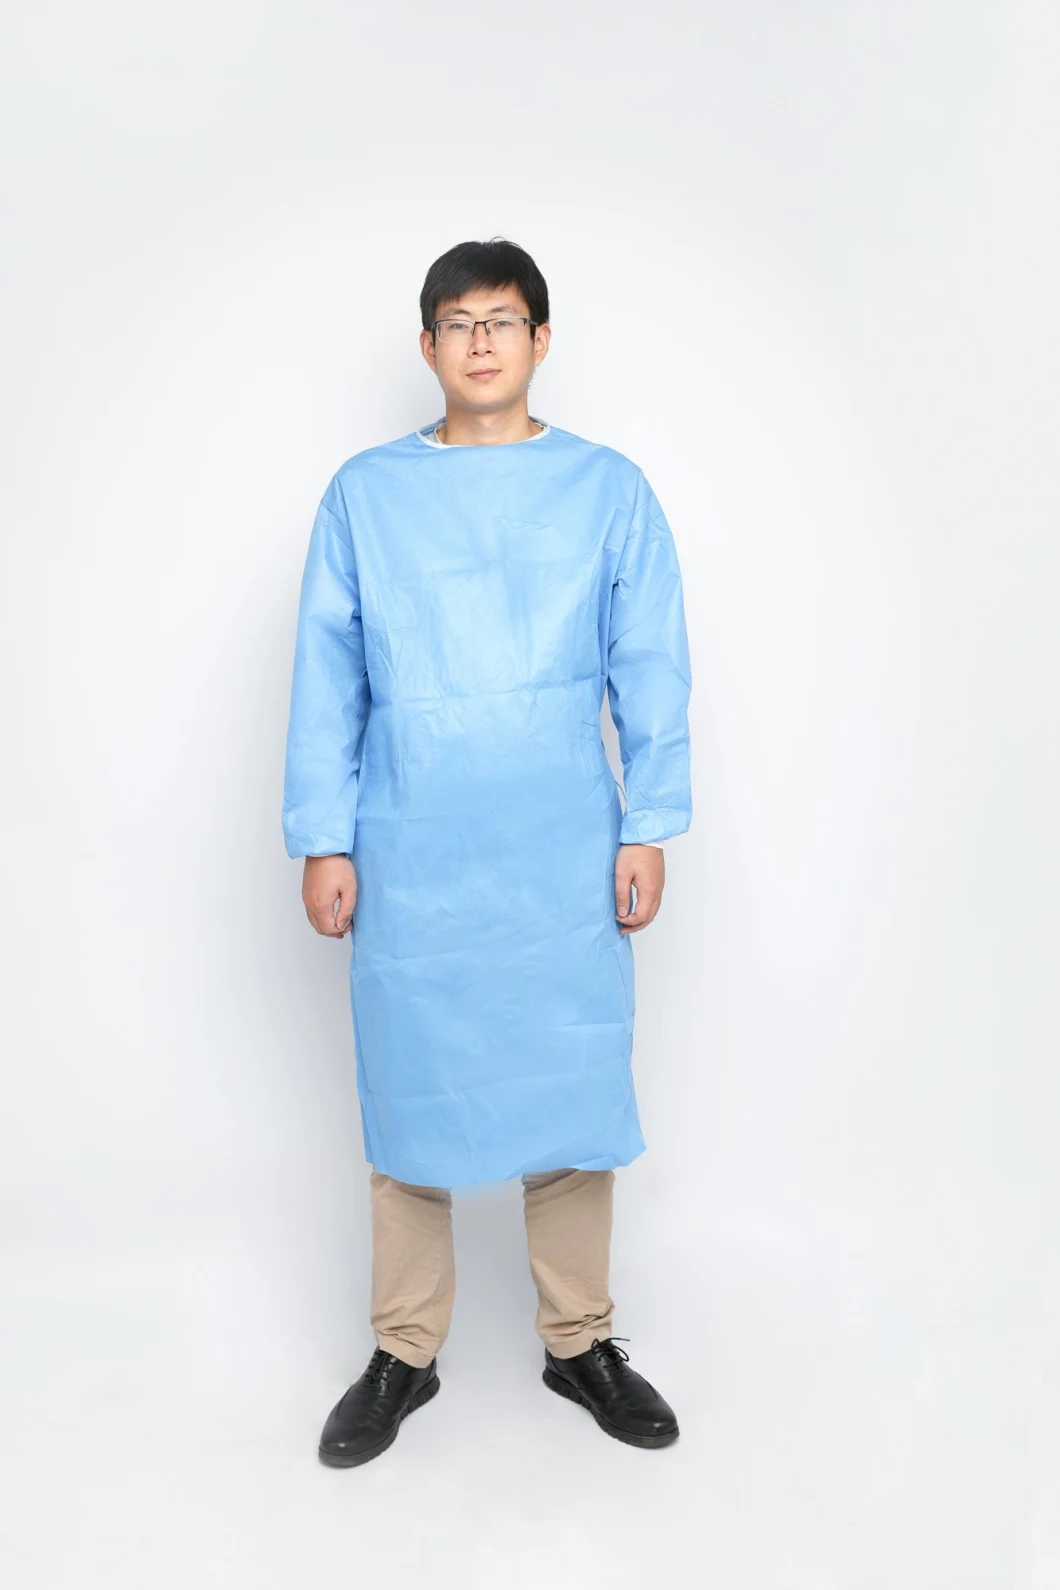 Surgical Gown/Patient Gown/PP Nonwoven Surgical Gown with CE Hospital Medical Patient Disposable Surgical Gown